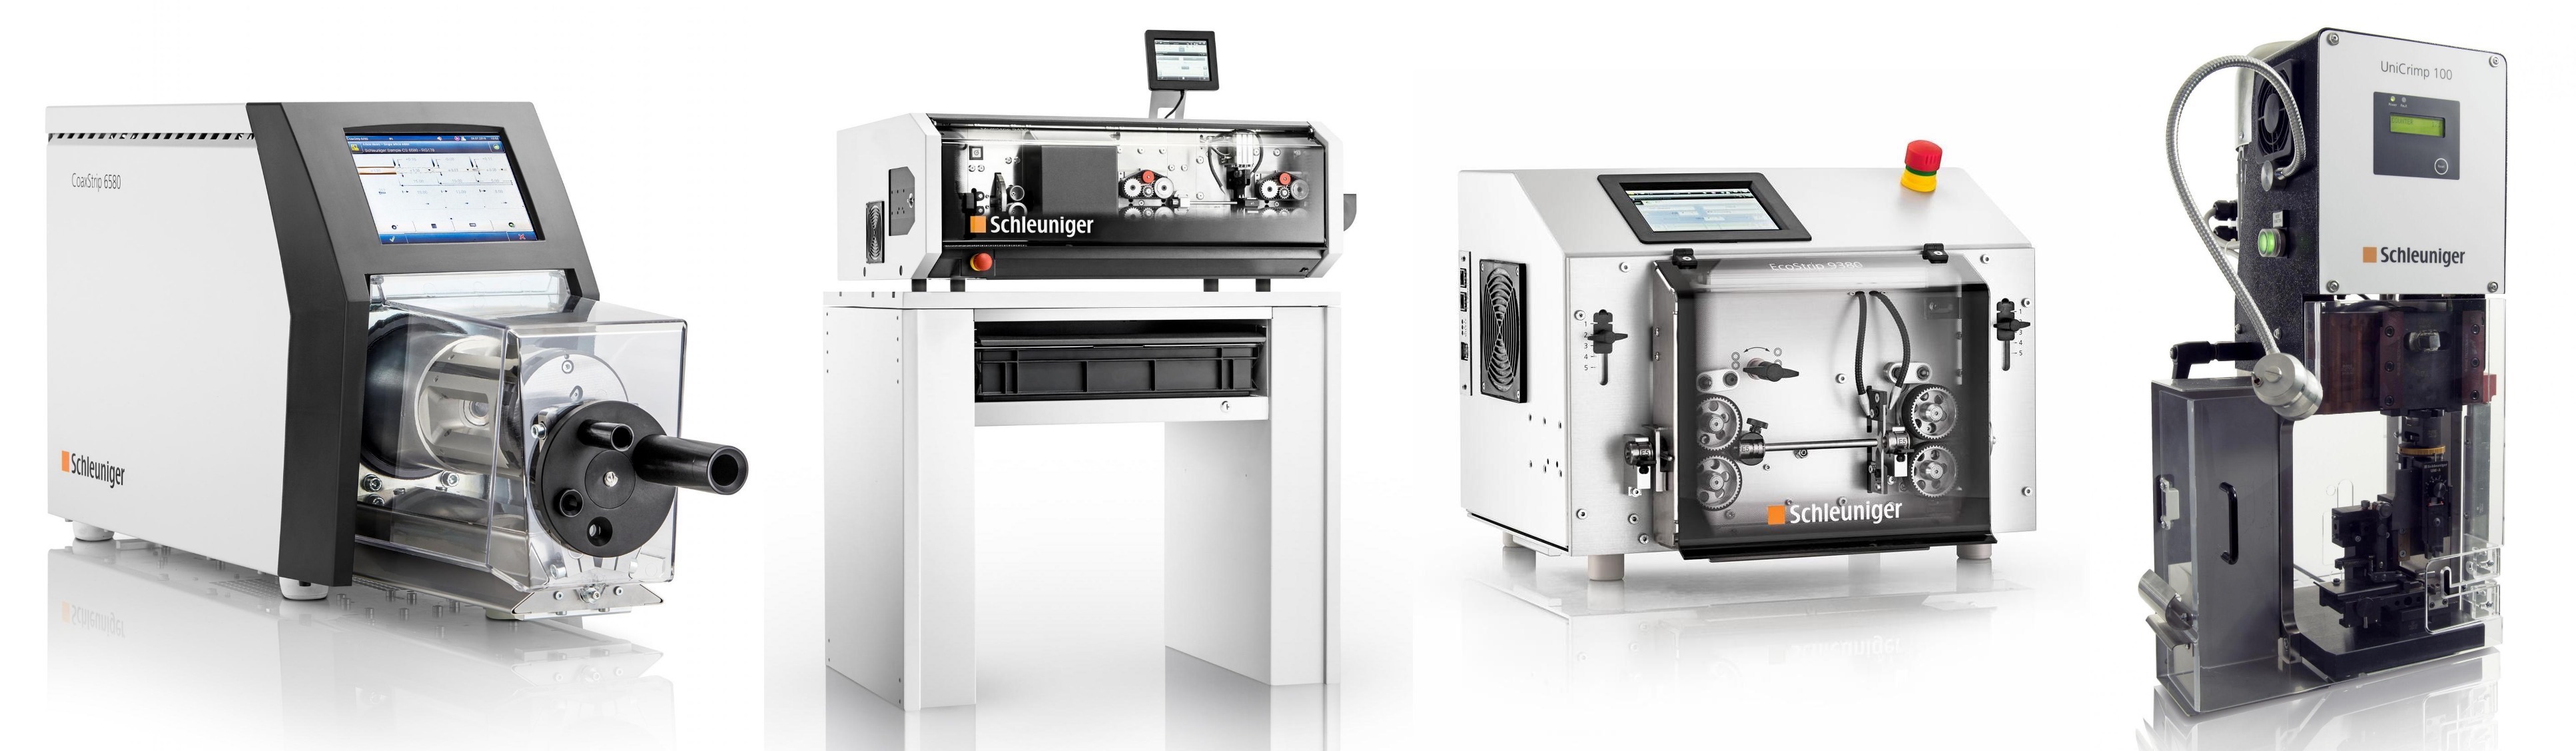 Schleuniger, Inc. is showcasing its portfolio of high-precision wire processing solutions at the IPC APEX EXPO